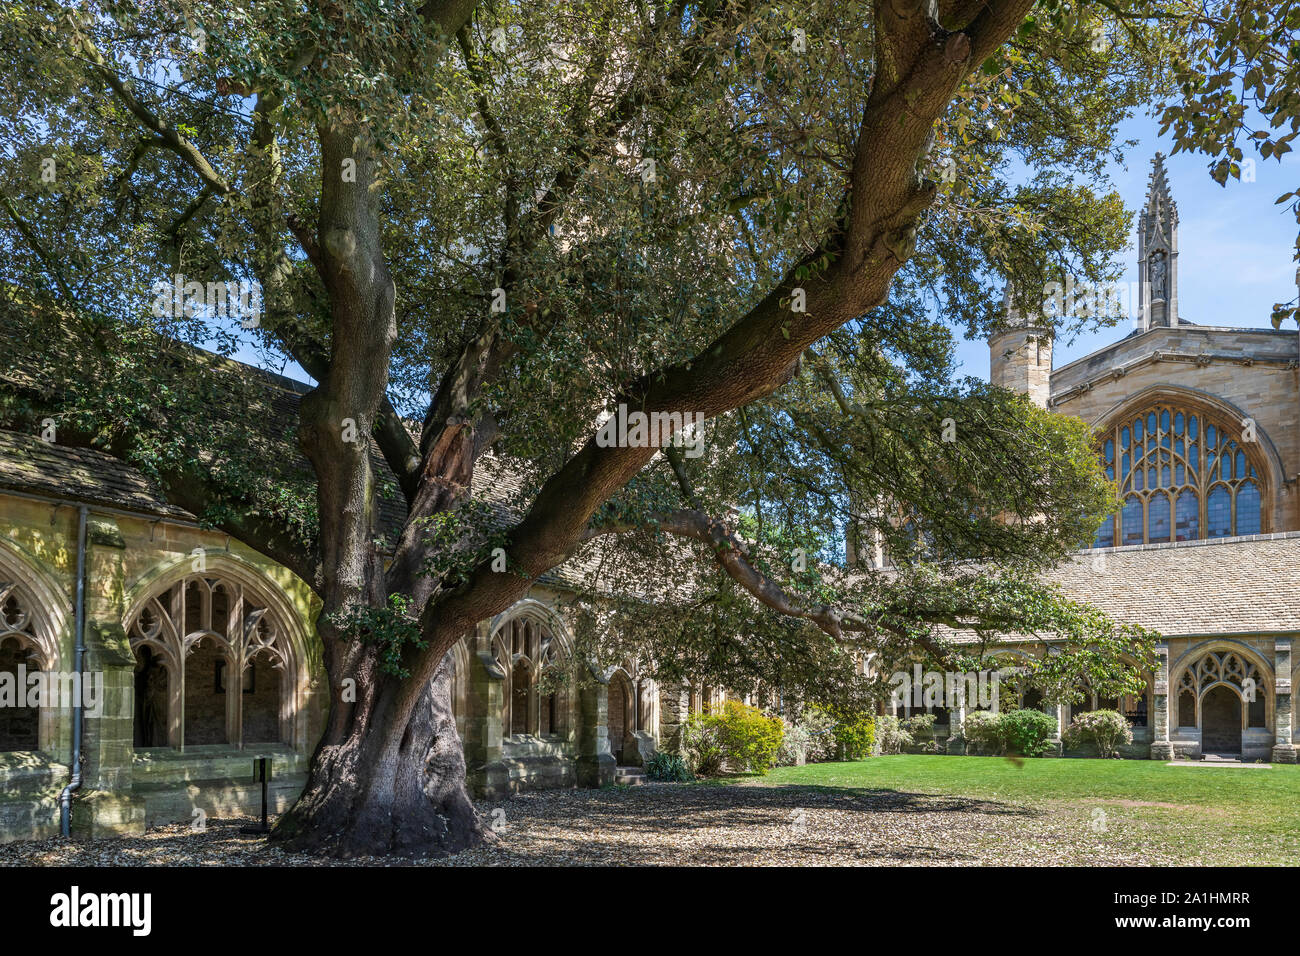 The distinctive tree in the New College Cloisters, used as a location for the famous Harry Potter films. The cloisters are located just off the Front Stock Photo